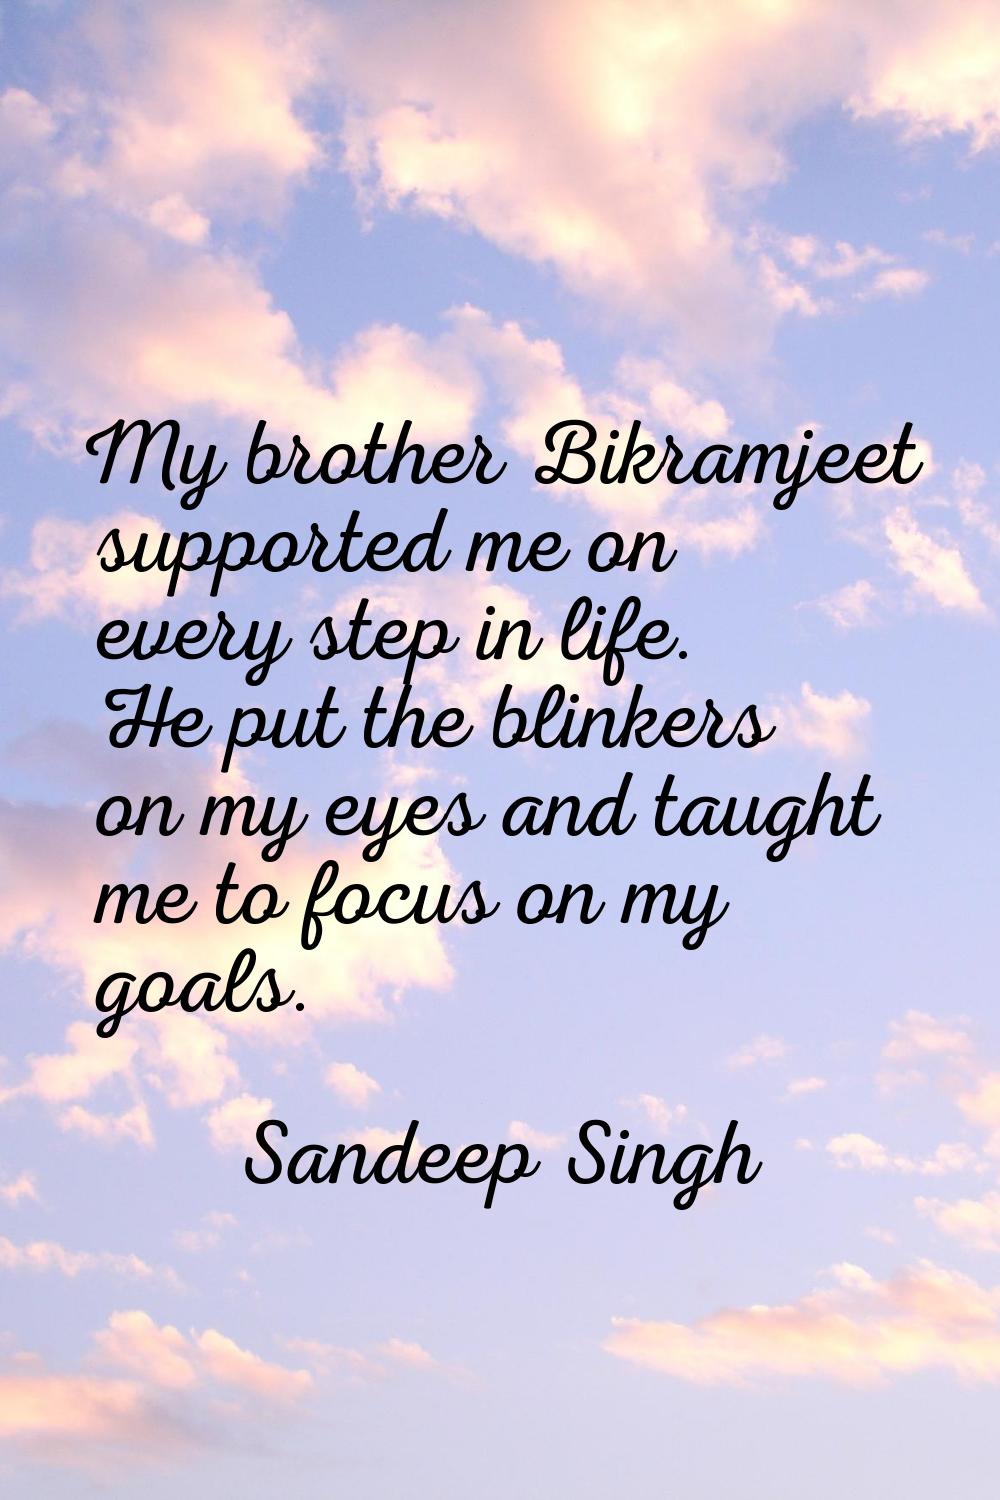 My brother Bikramjeet supported me on every step in life. He put the blinkers on my eyes and taught